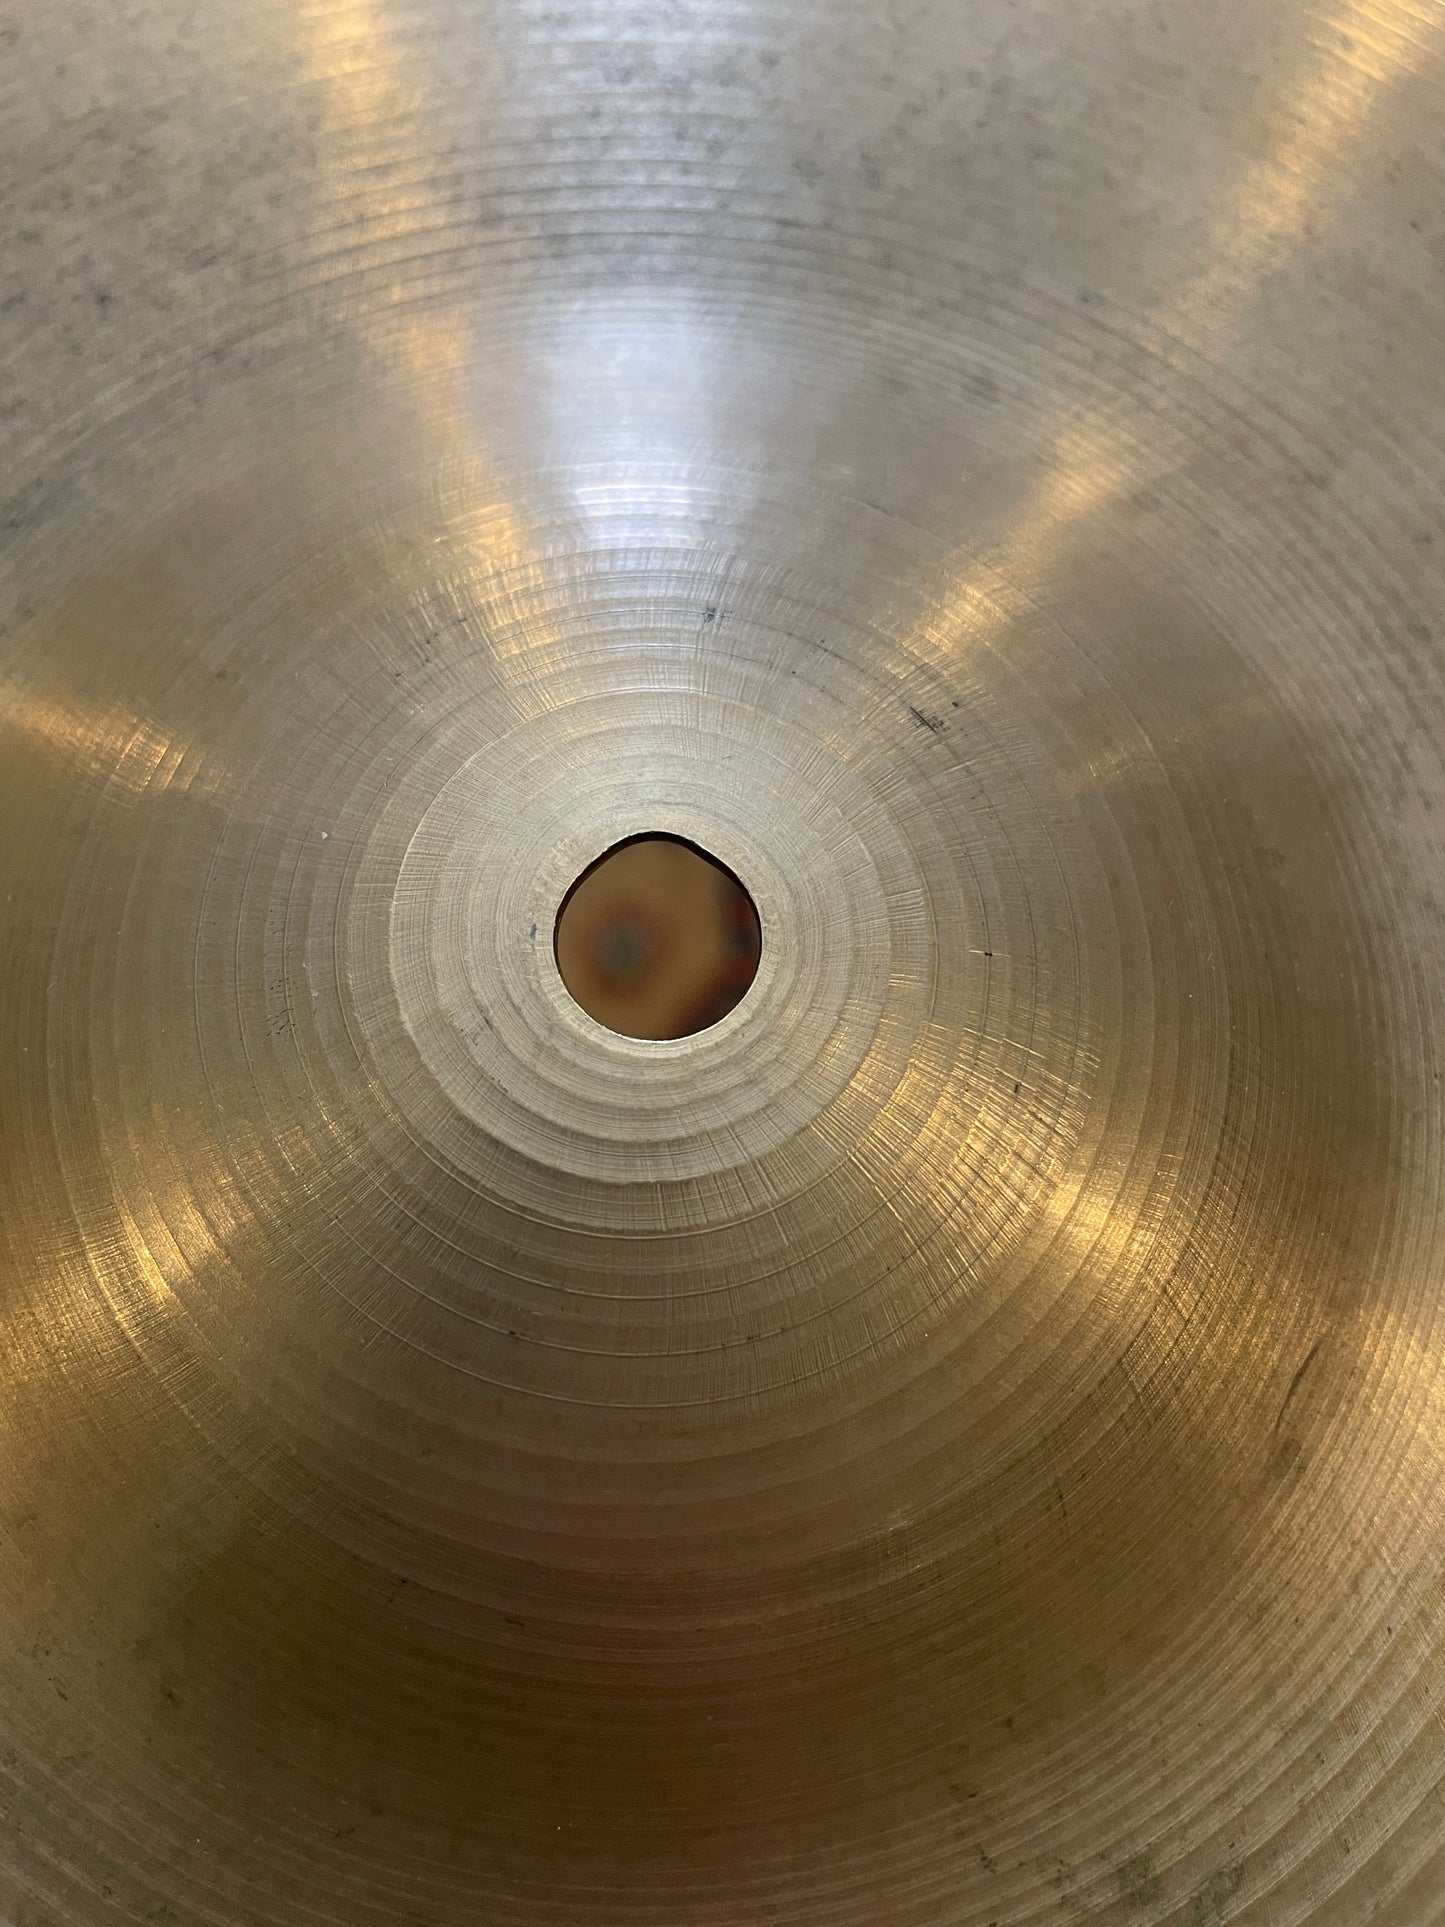 20" Sabian B20 Ride Cymbal 2240g Made in Italy *Video Demo*